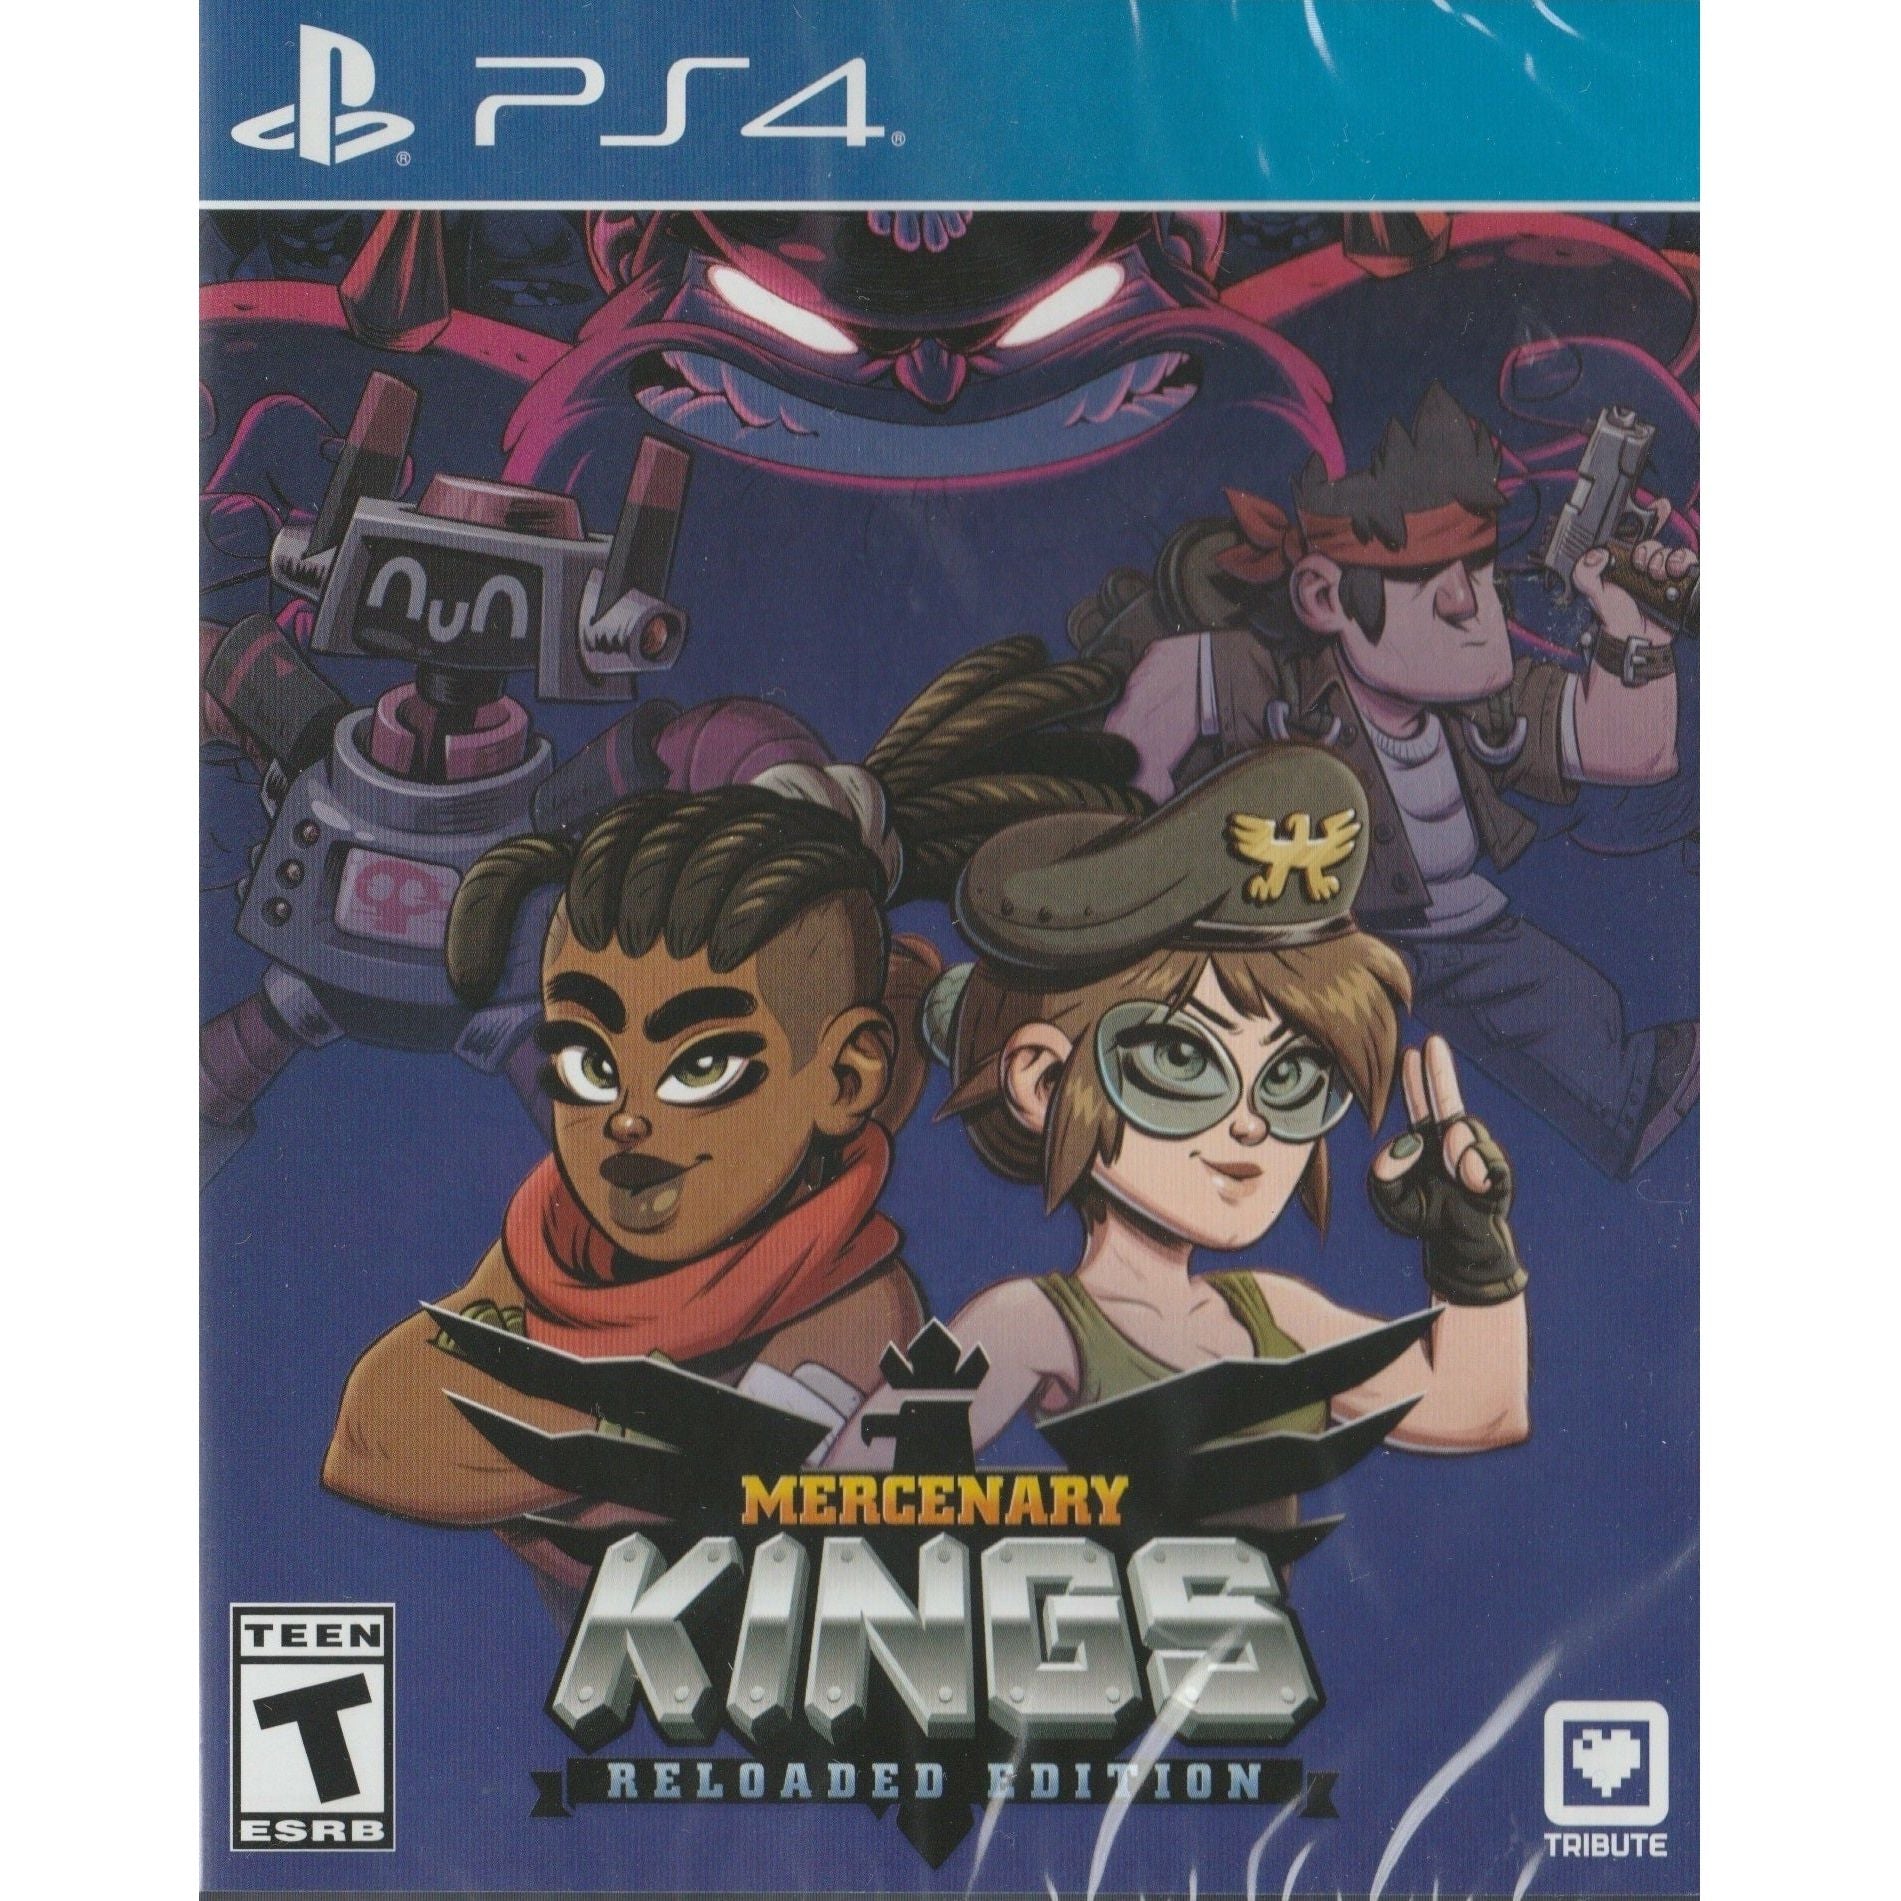 PS4 - Mercenary Kings Reloaded Edition (Limited Run Game #274)